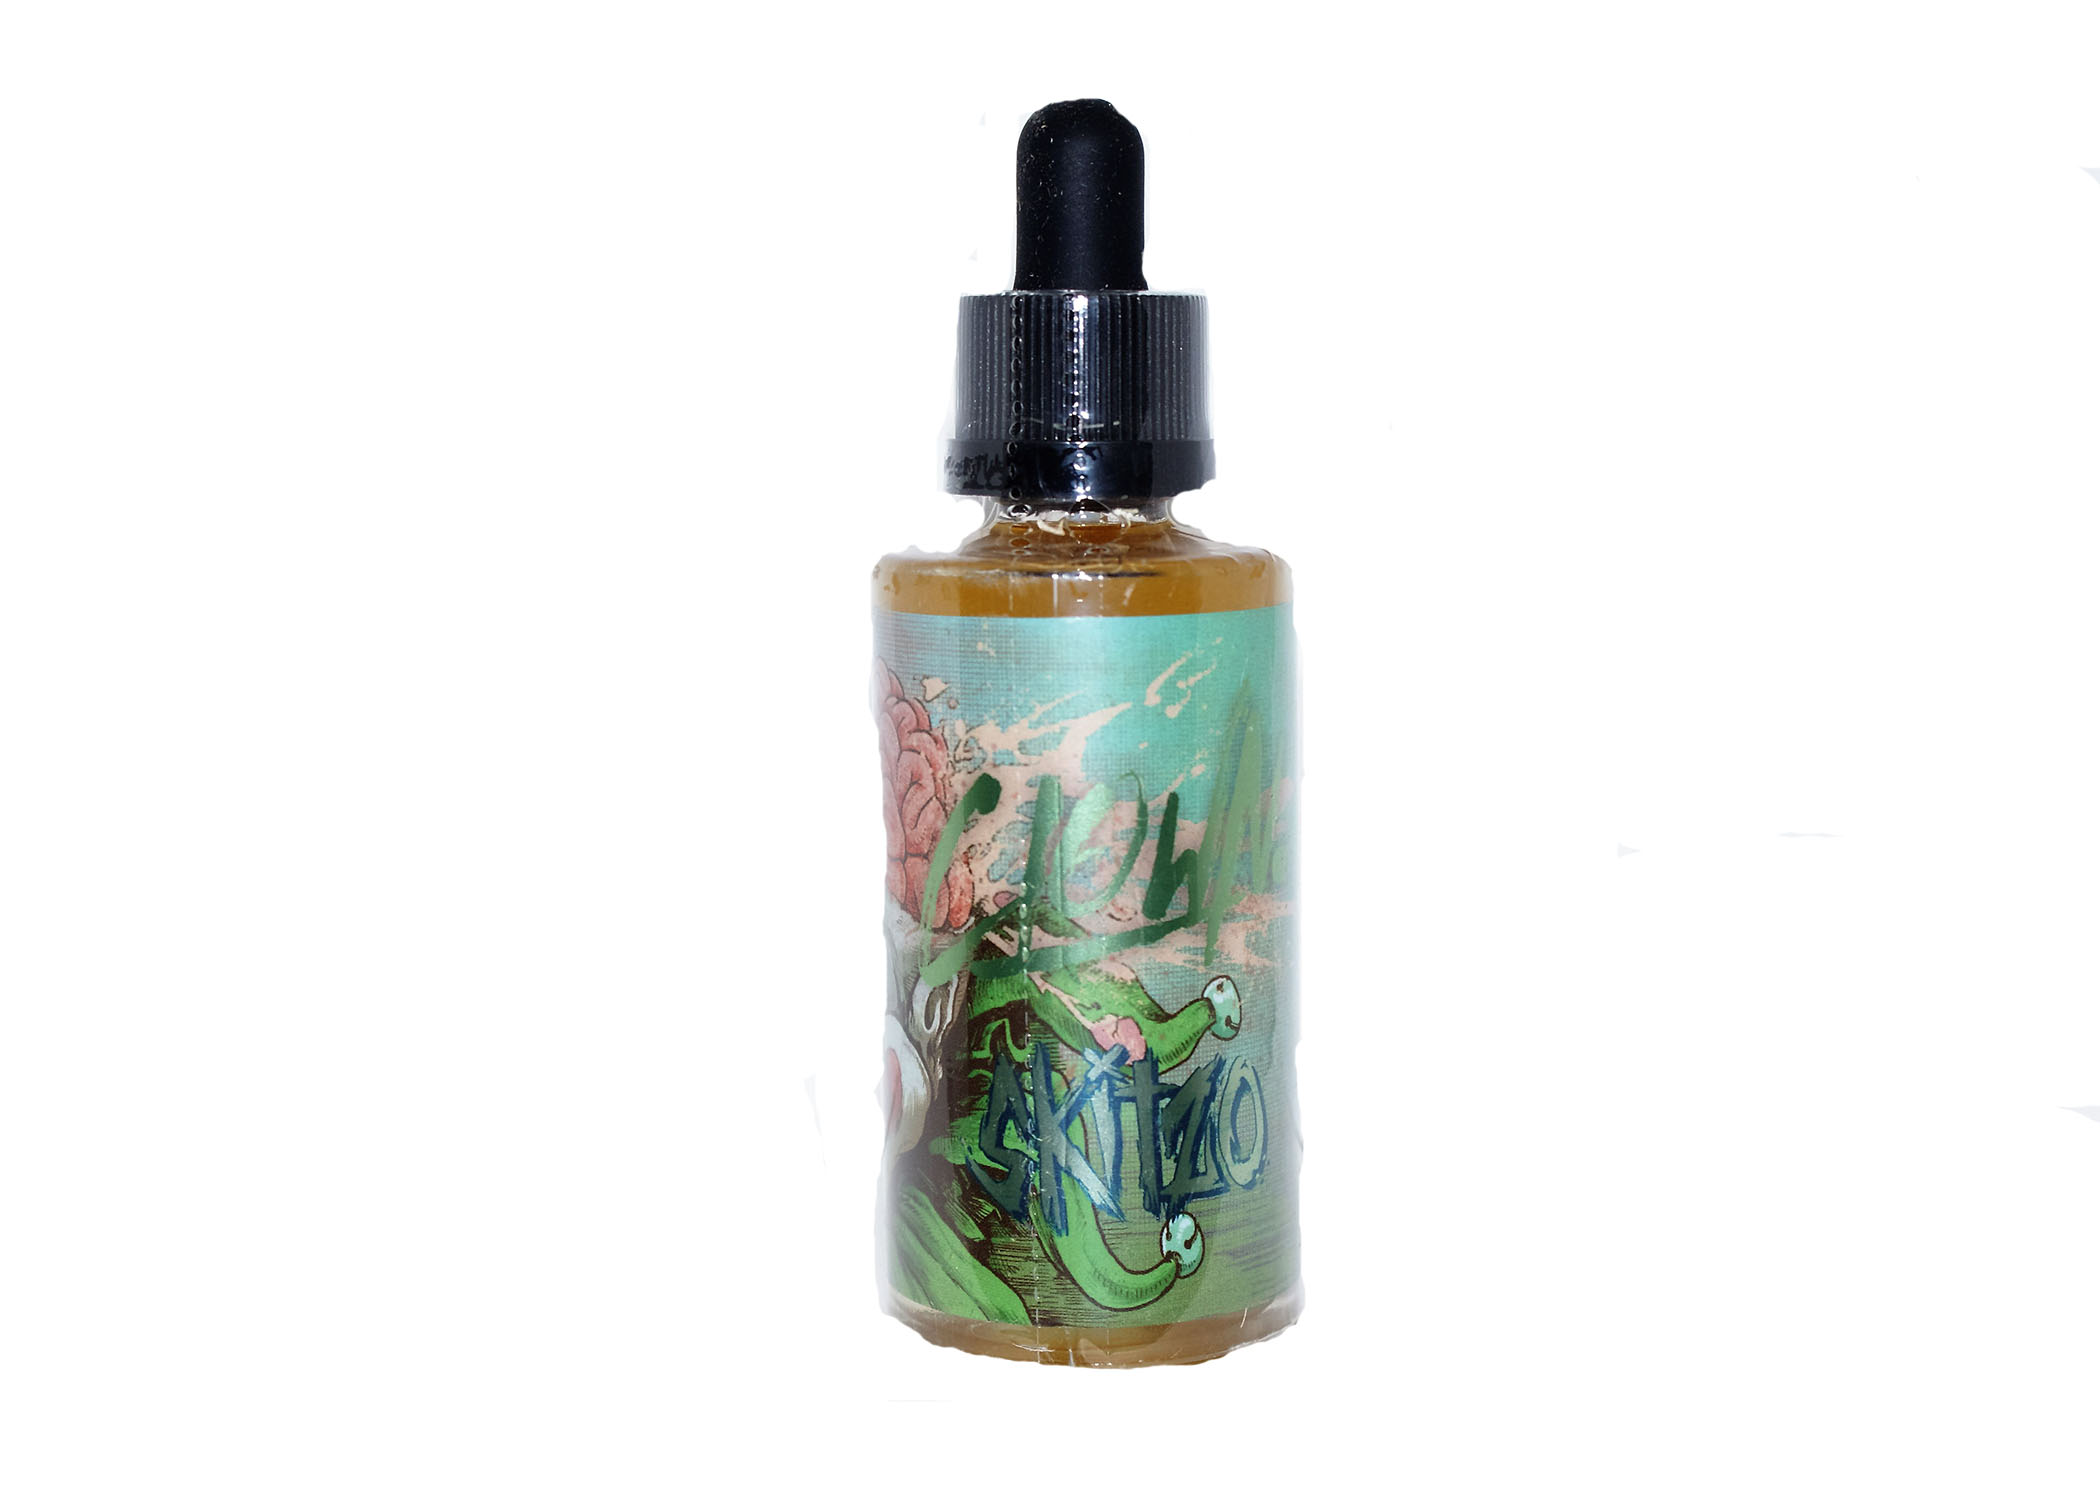 Get Your eJuice - Clown Skitzo